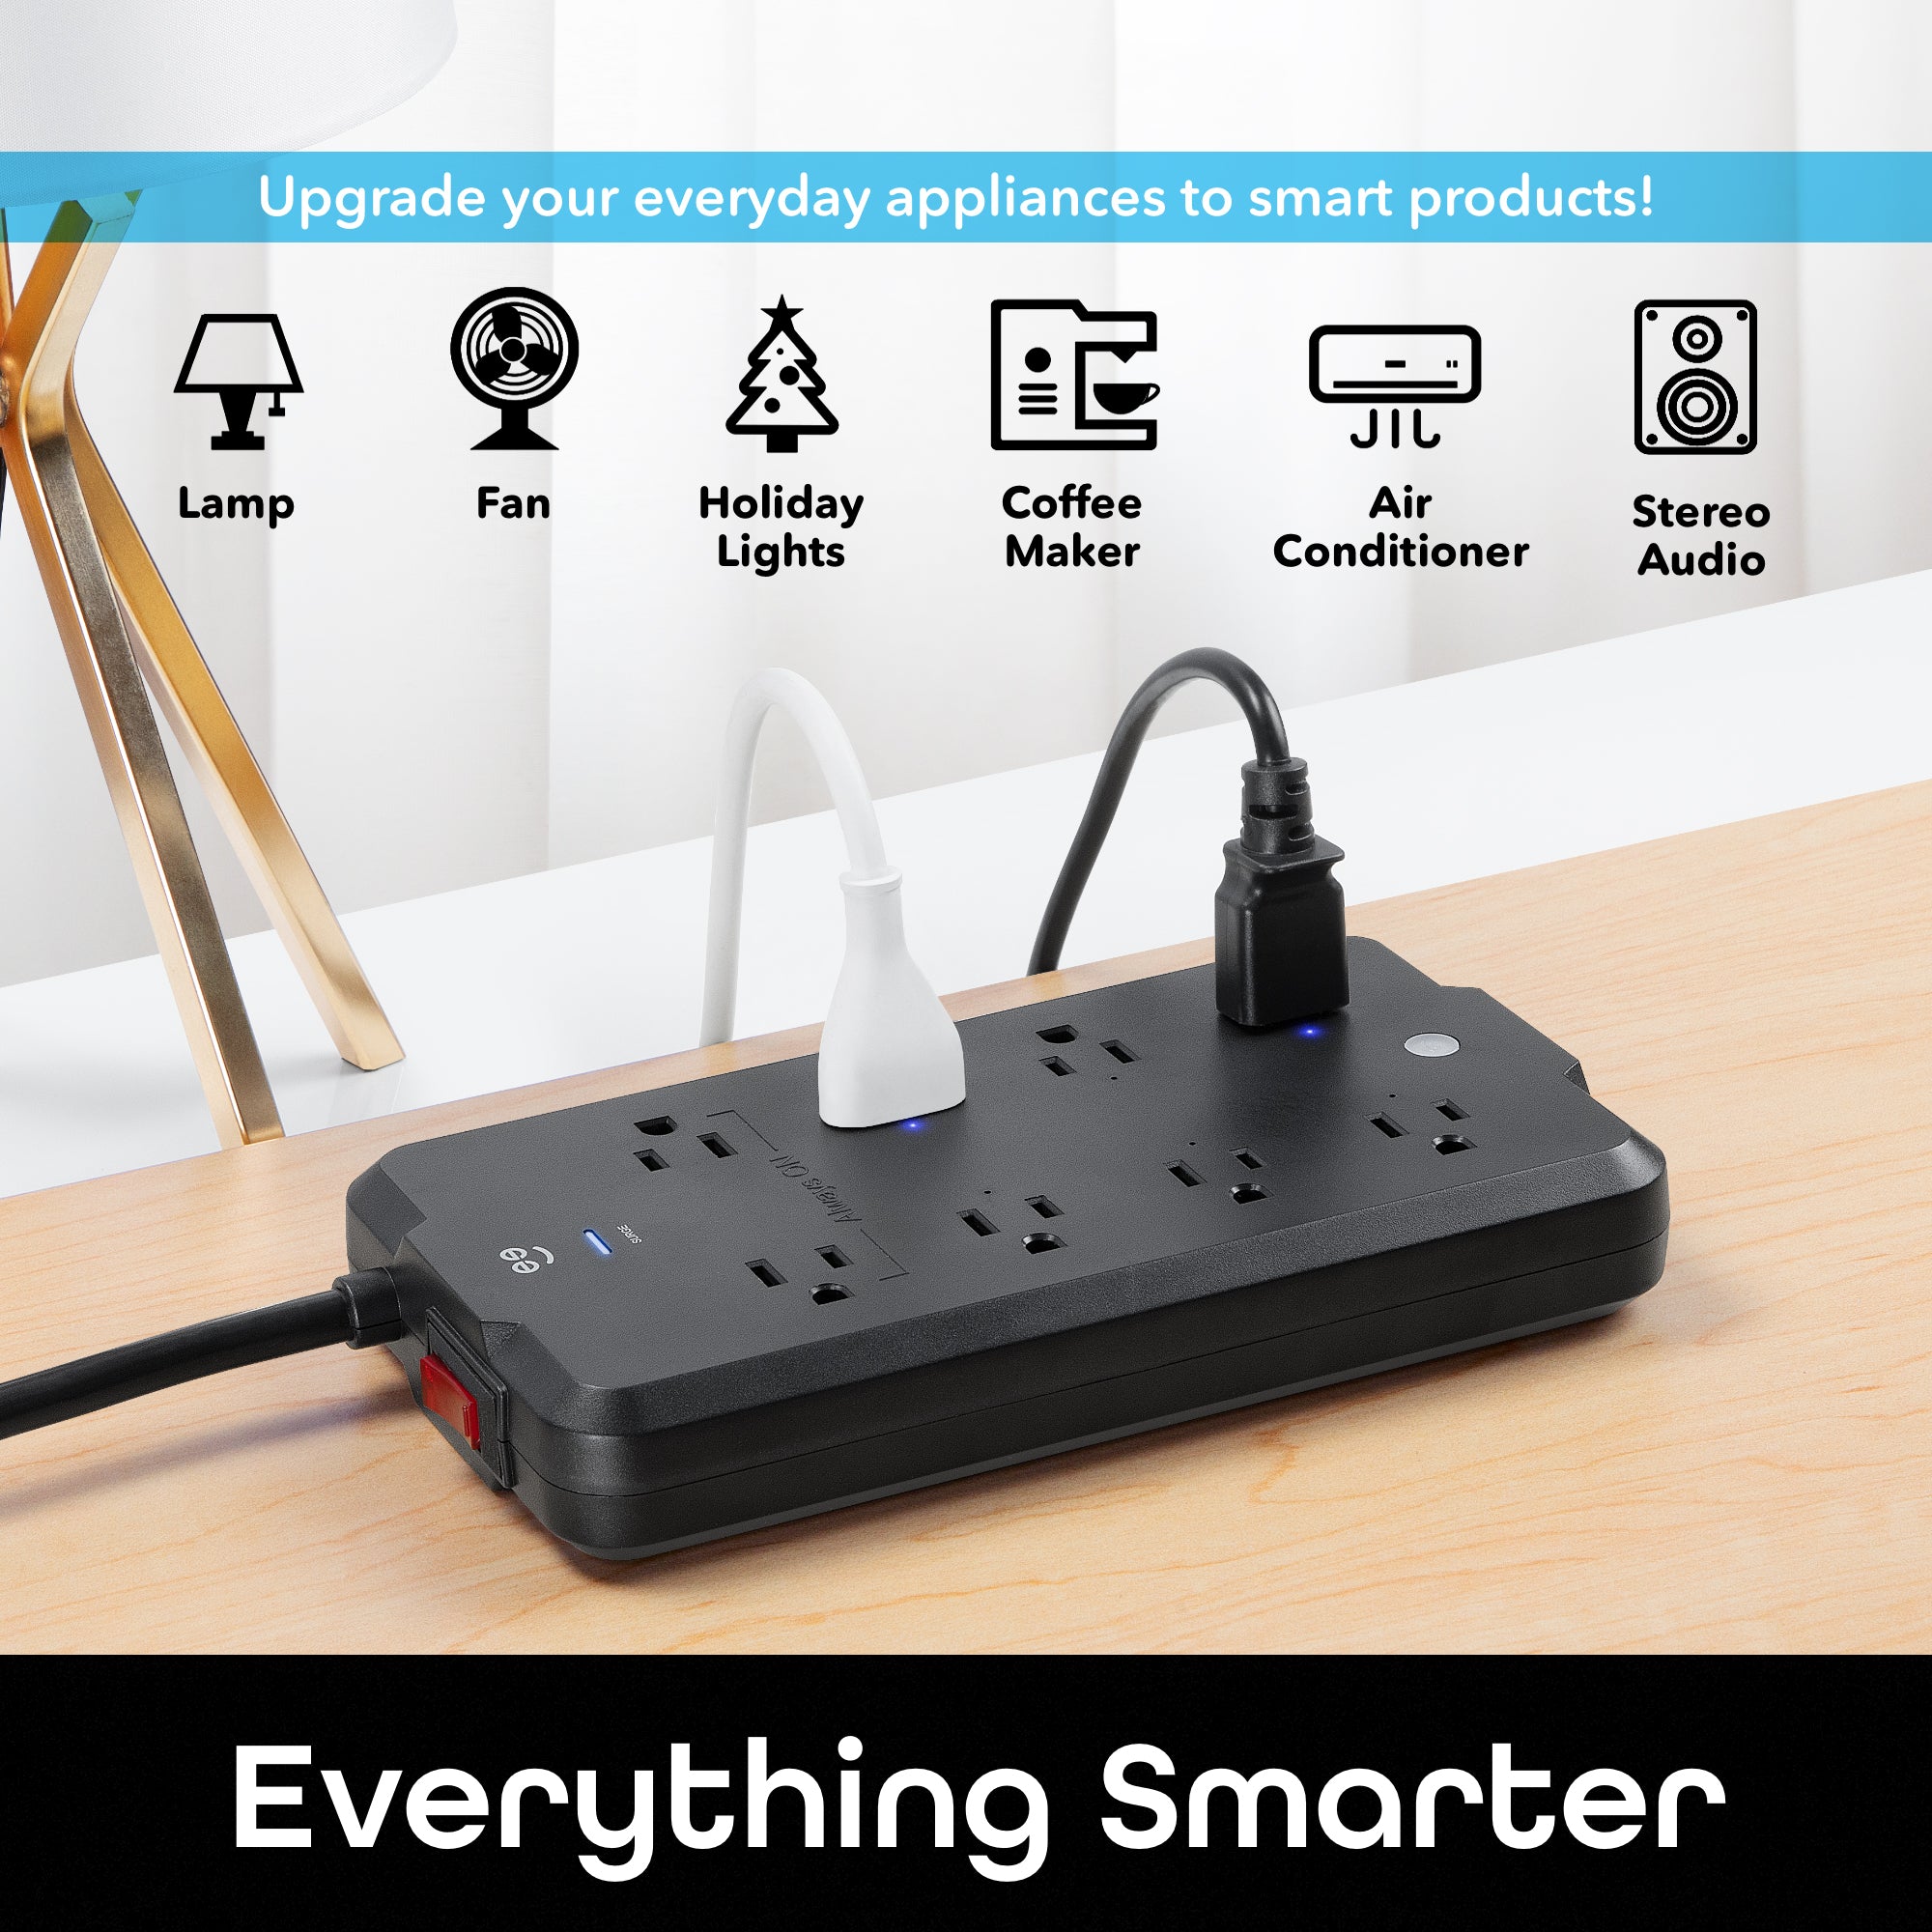 Geeni Surge Ultra 8-Outlet Surge Protector